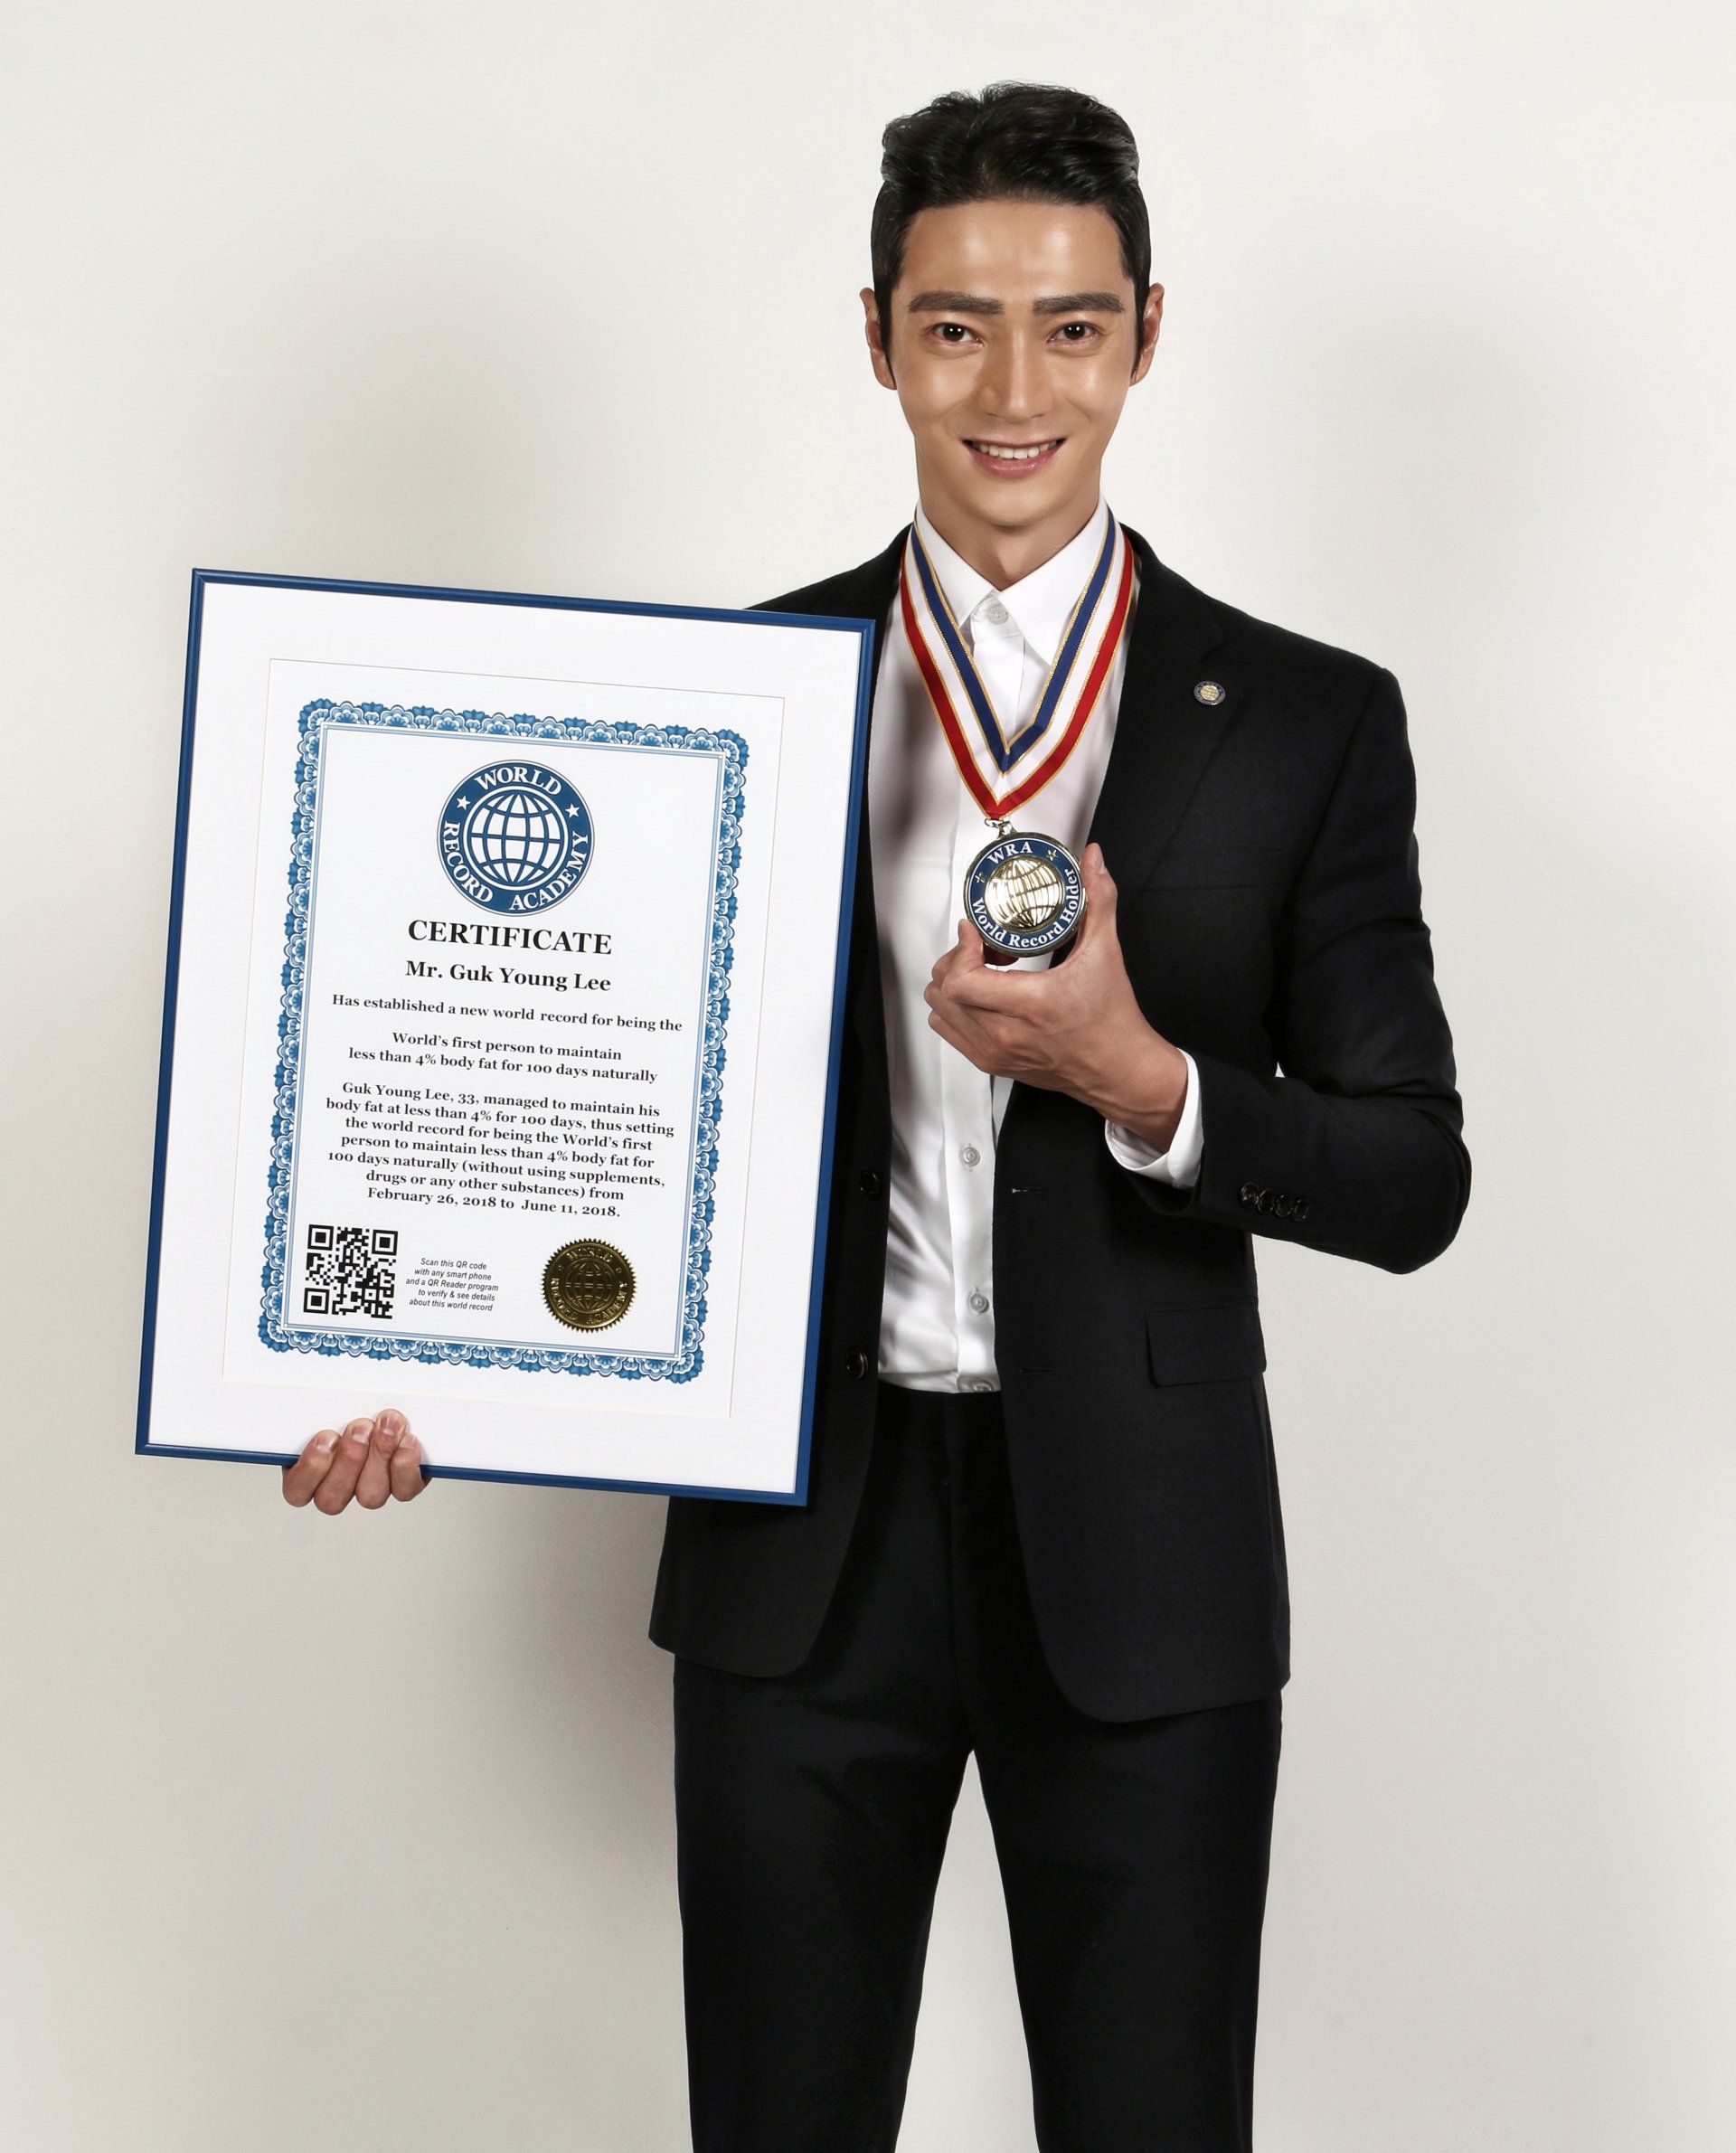 Guk Young Lee, 33,  managed to maintain his body fat at less than 4% for more than 100 days, thus setting the world record for being the World's First person to maintain less than 4% body fat for  100 days naturally (without using supplements, drugs or any other substances), according to the Academy Of World Records.